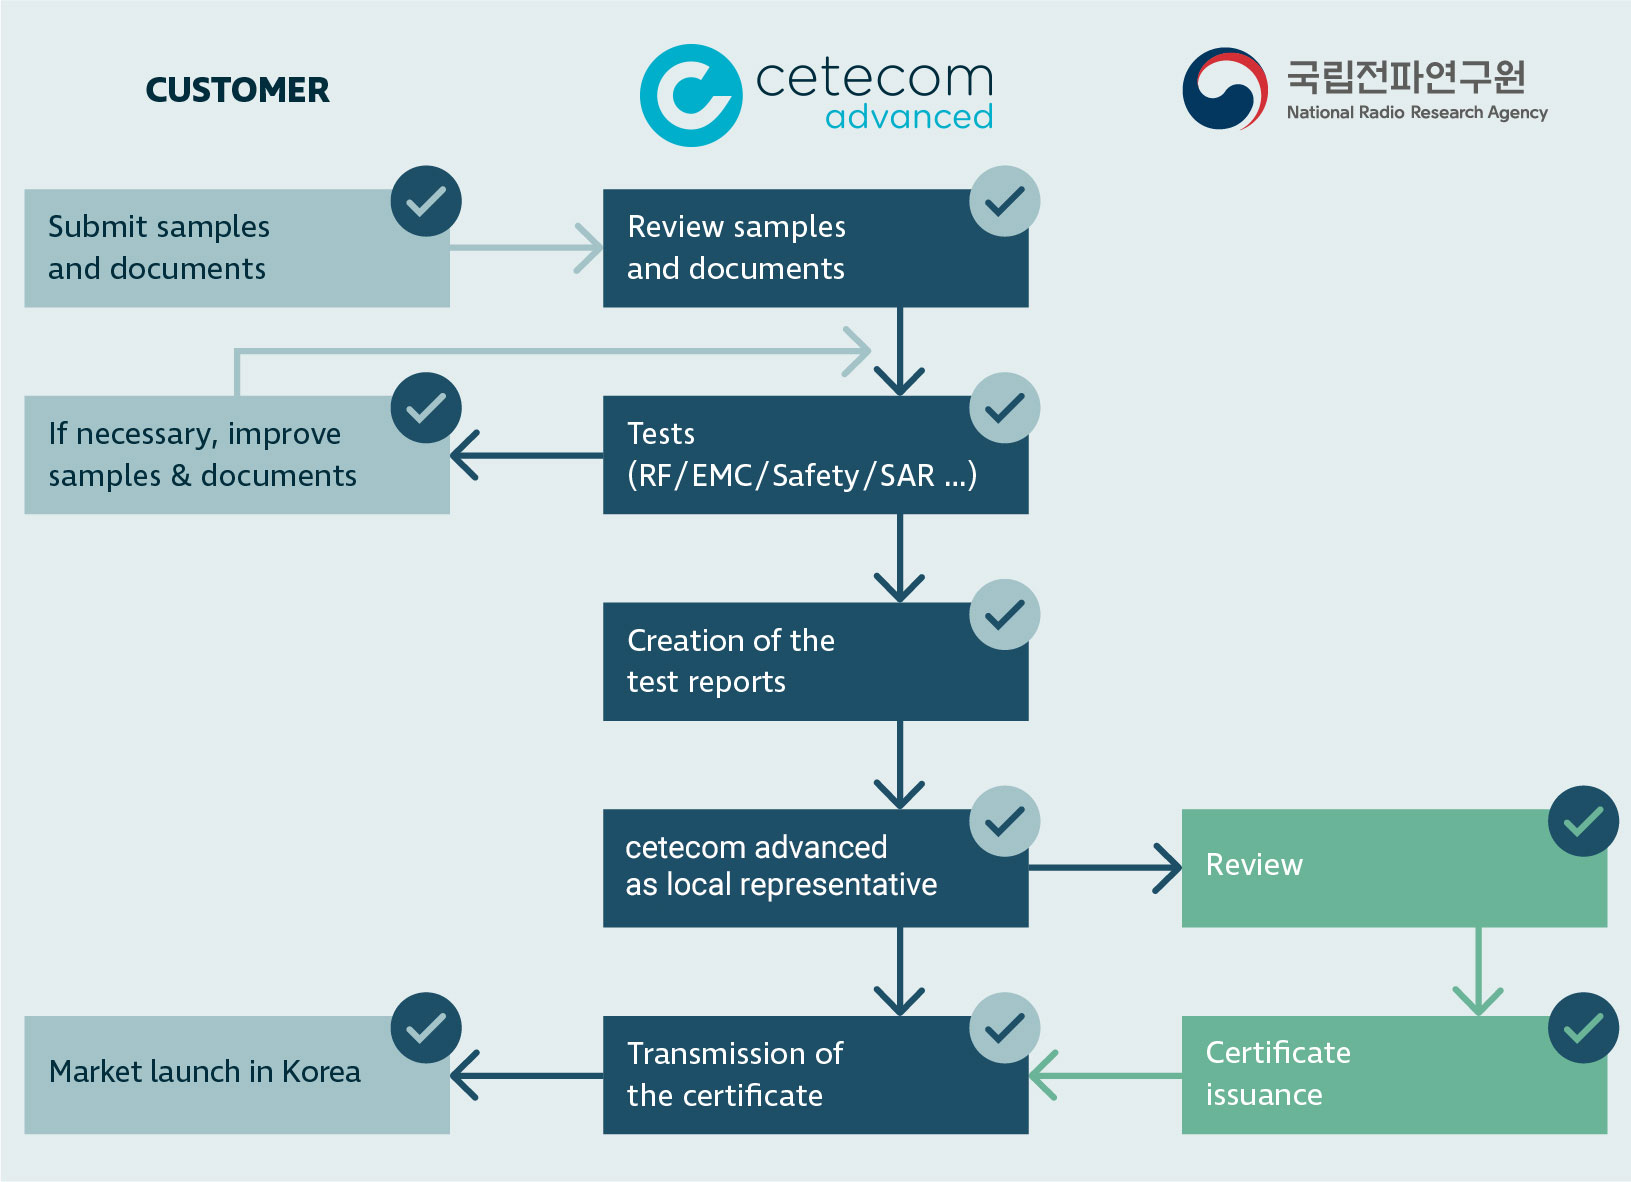 Schematic representation of the approval process for a KC certification with Cetecom